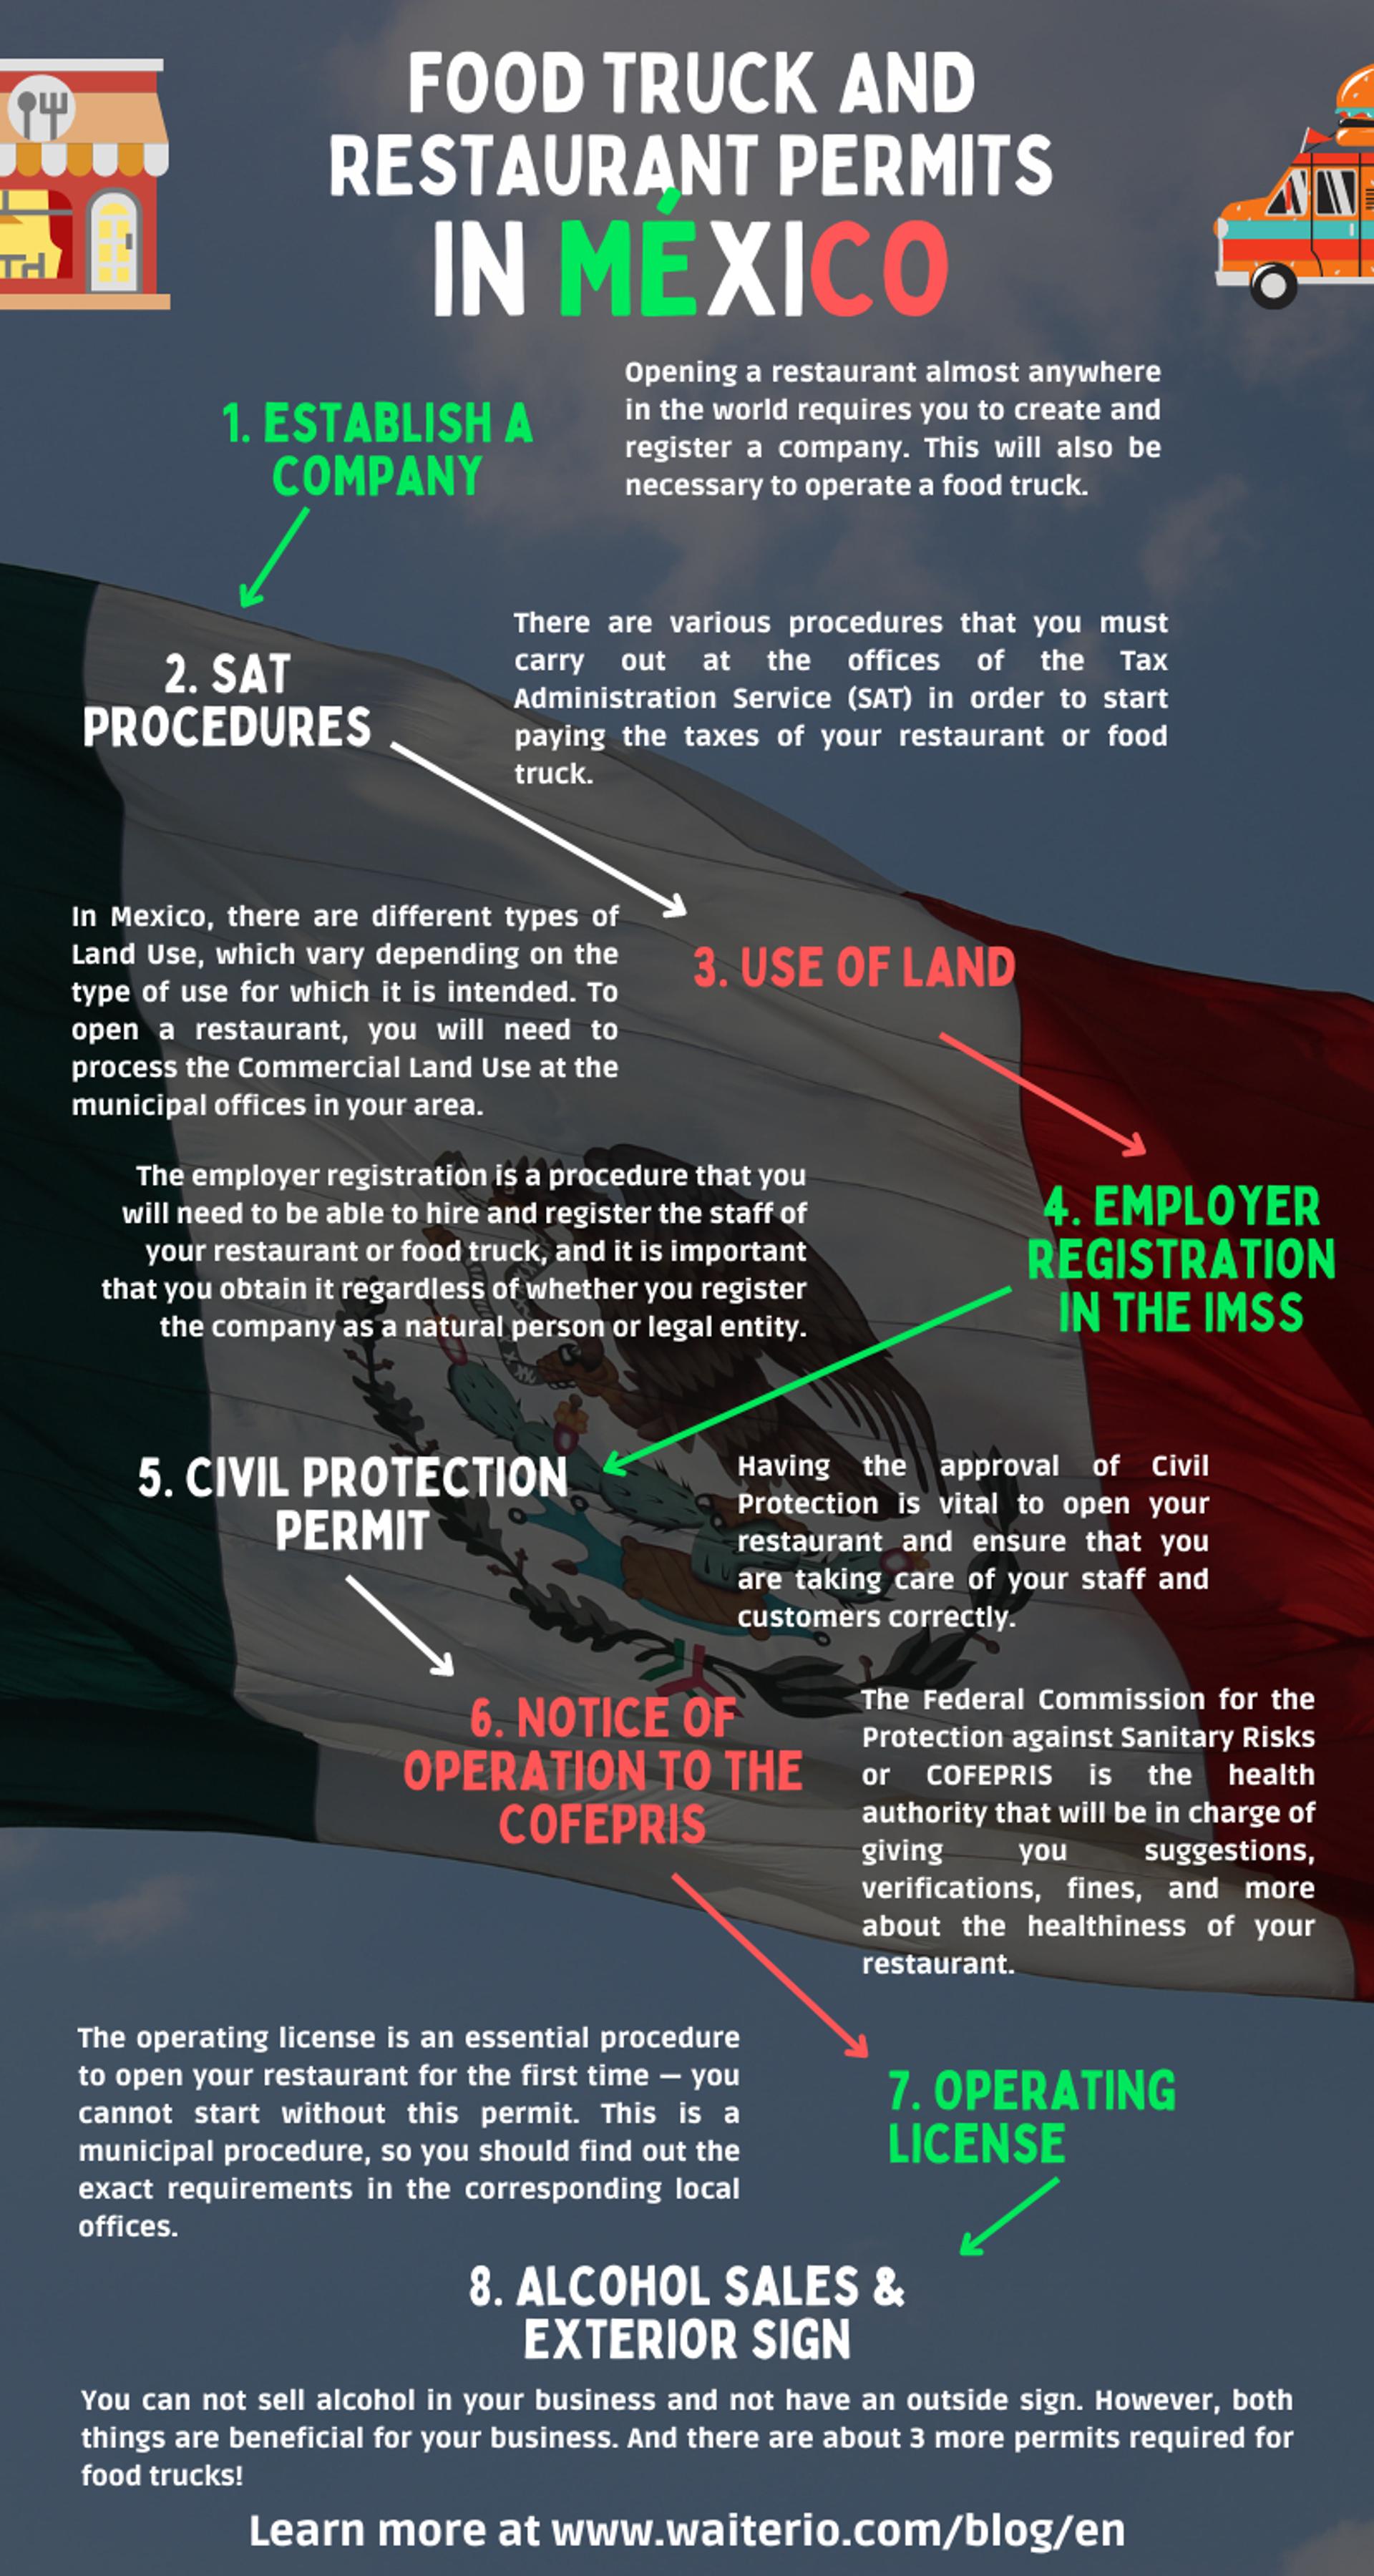 Infographic about food truck and restaurant permits for Mexico